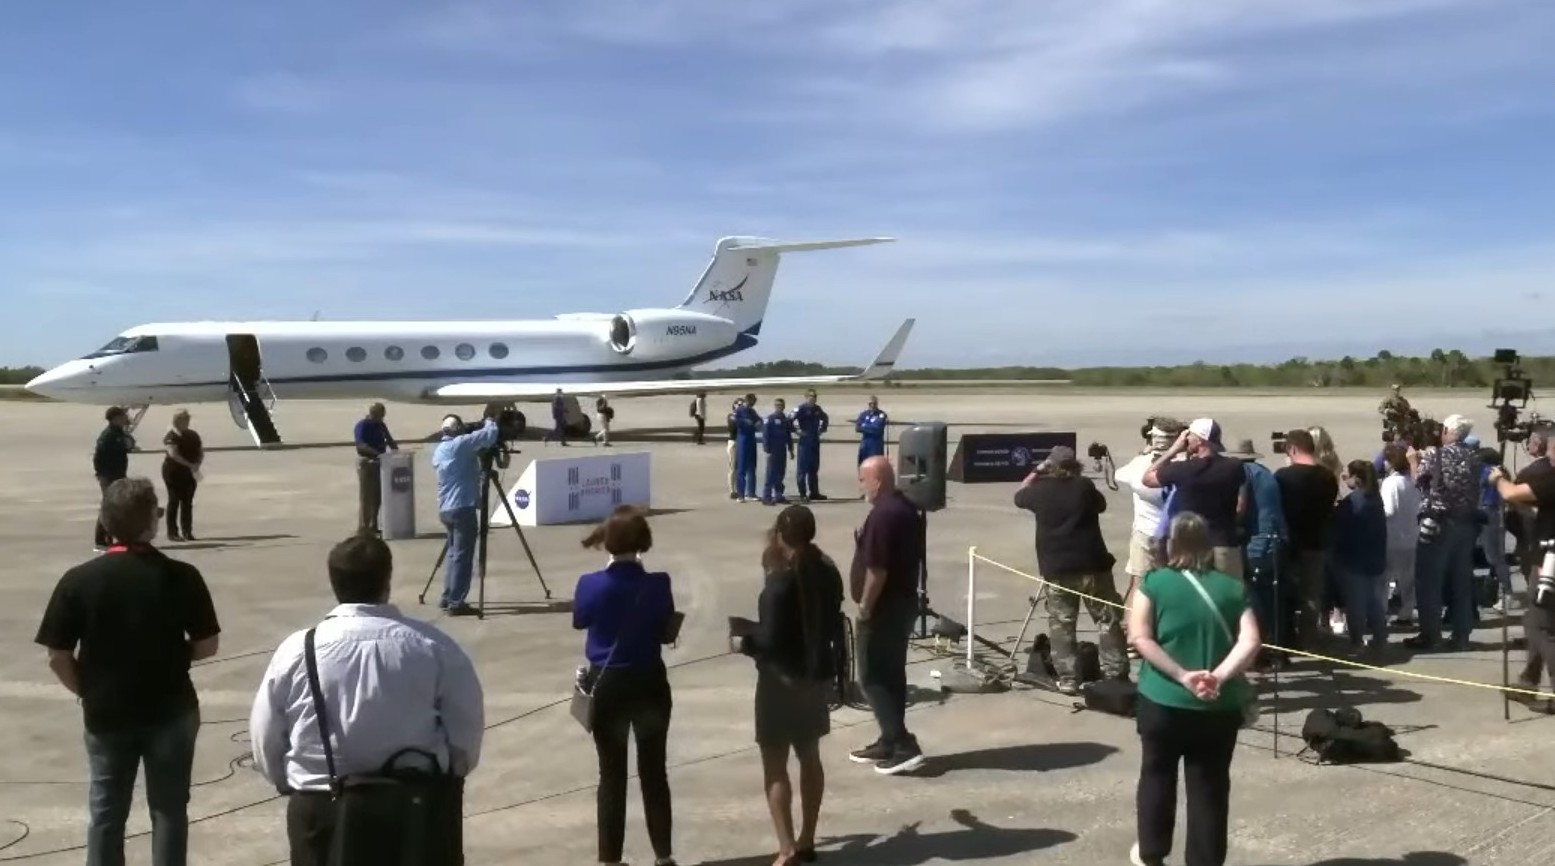 SpaceX Crew-6 astronauts arrive at spaceport for Feb. 26 launch | Space